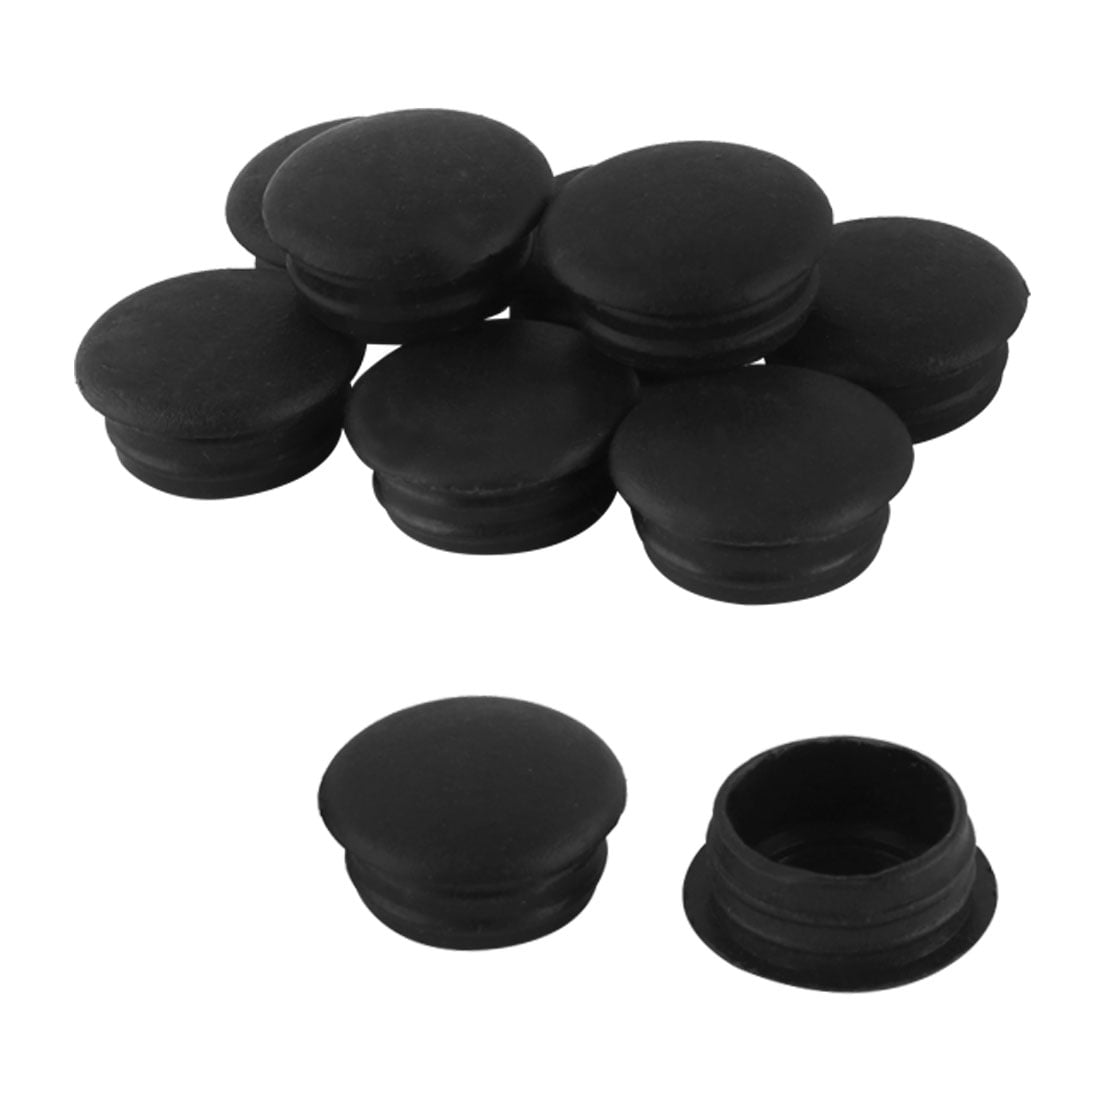 10x Black Plastic Blanking End Caps Cap Insert Plugs Bung For Round Pipe Tube LF 